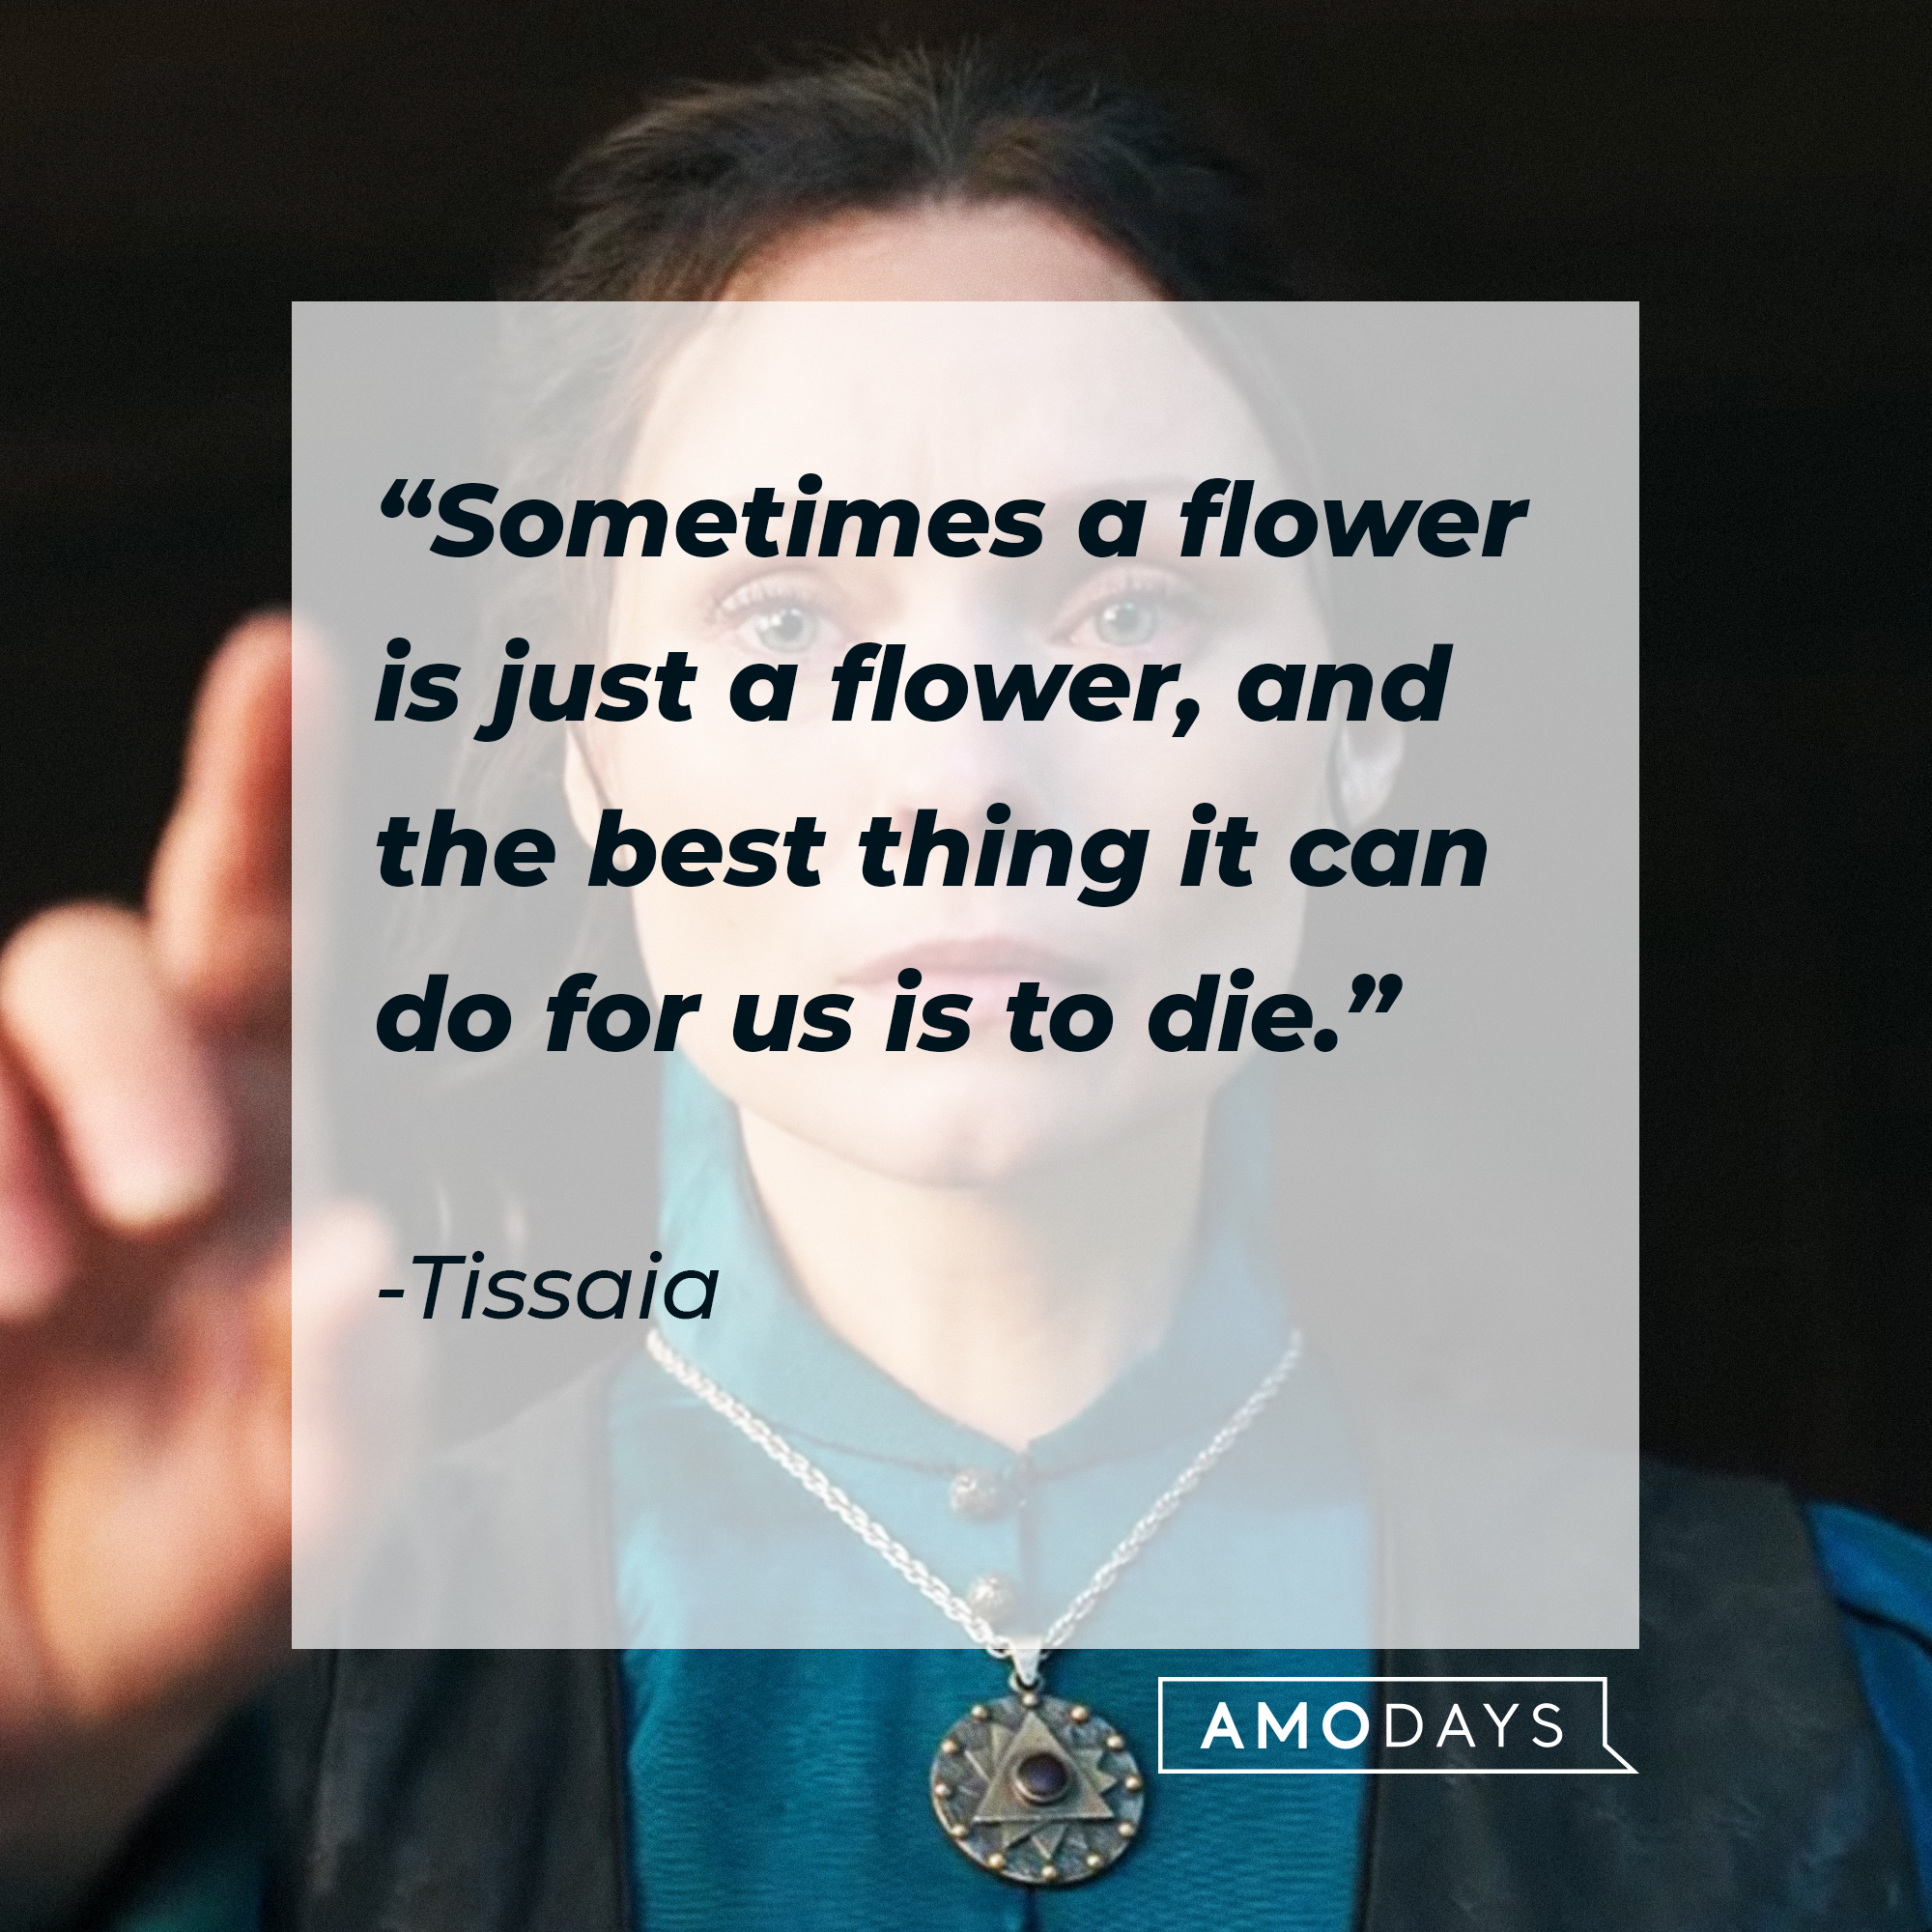 Tissaia's quote: "Sometimes a flower is just a flower, and the best thing it can do for us is to die." | Source: YouTube/Netflix